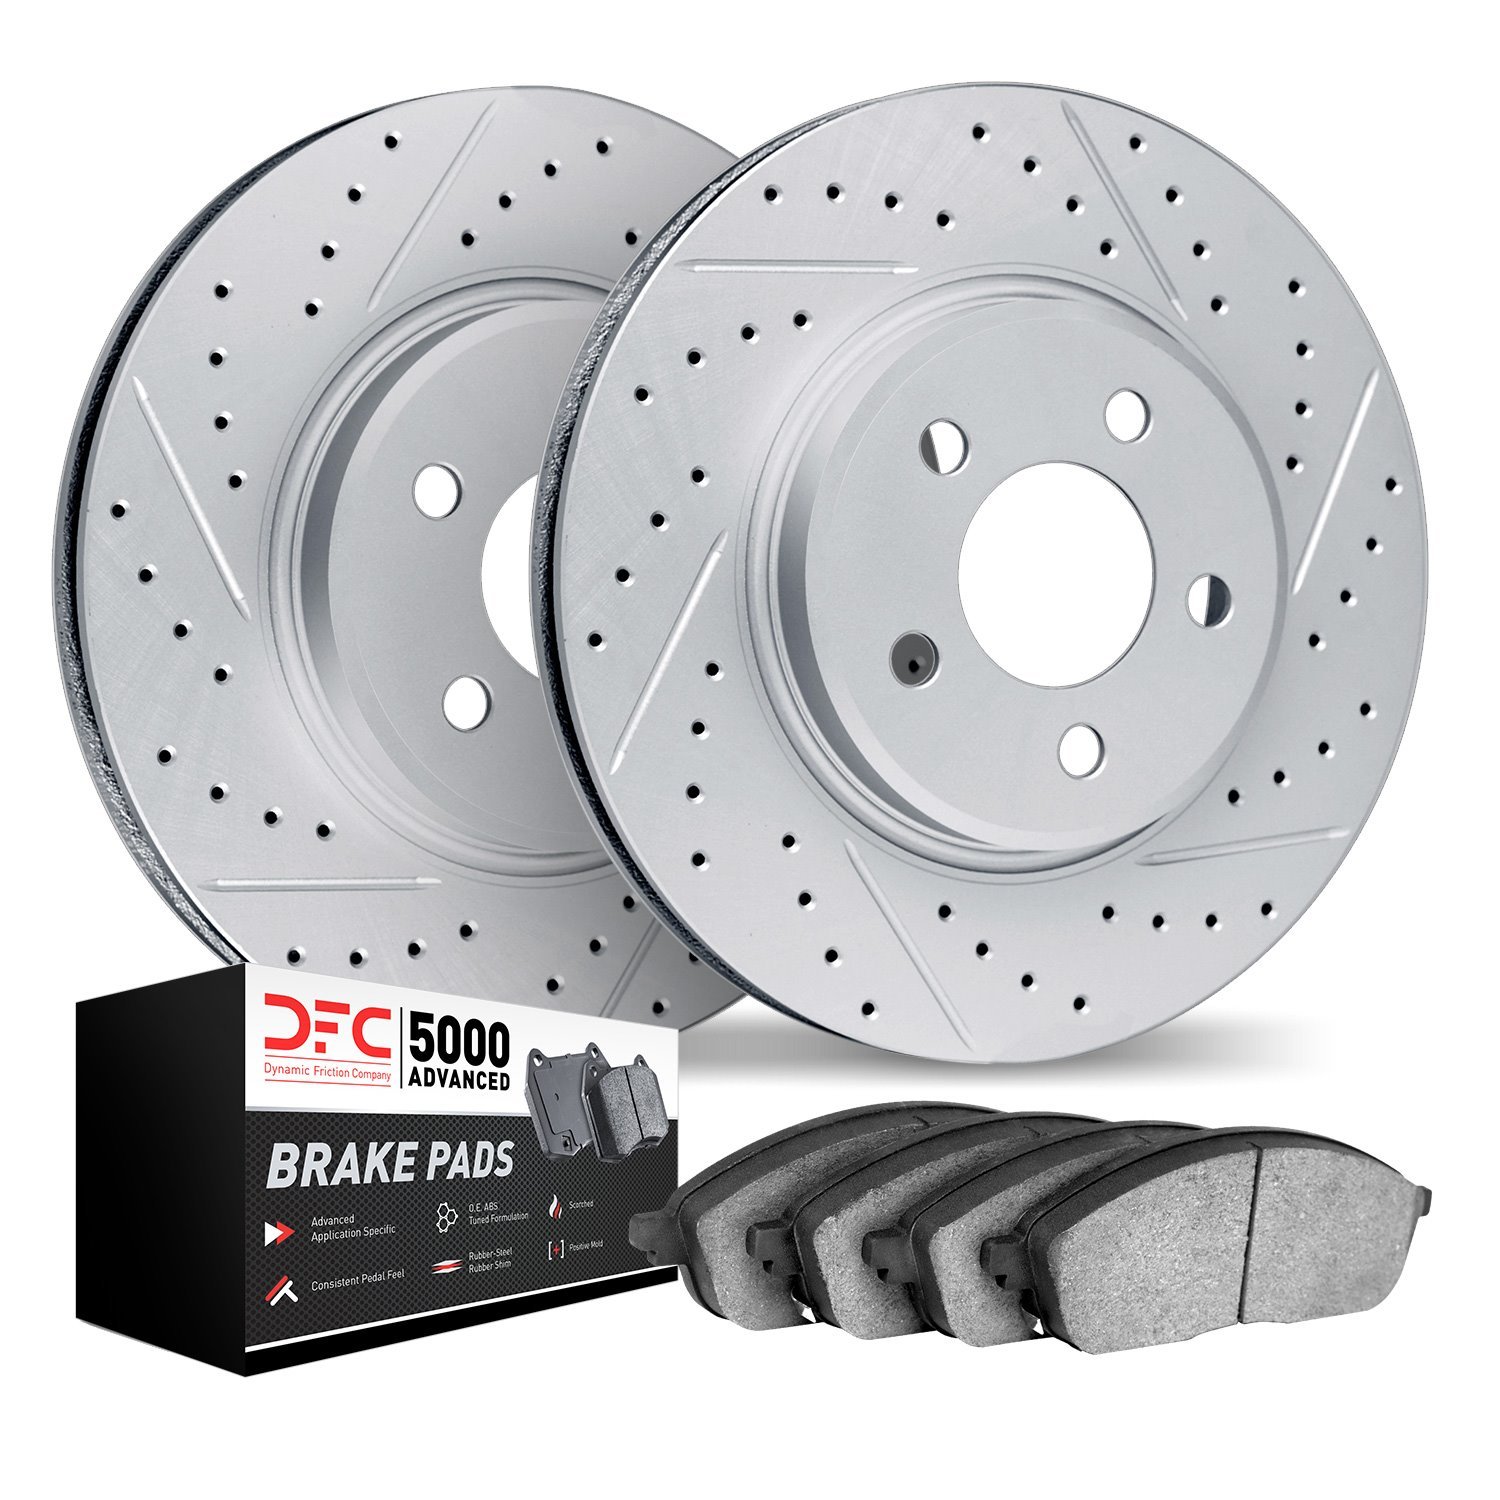 2502-02004 Geoperformance Drilled/Slotted Rotors w/5000 Advanced Brake Pads Kit, 1969-1977 Porsche, Position: Front